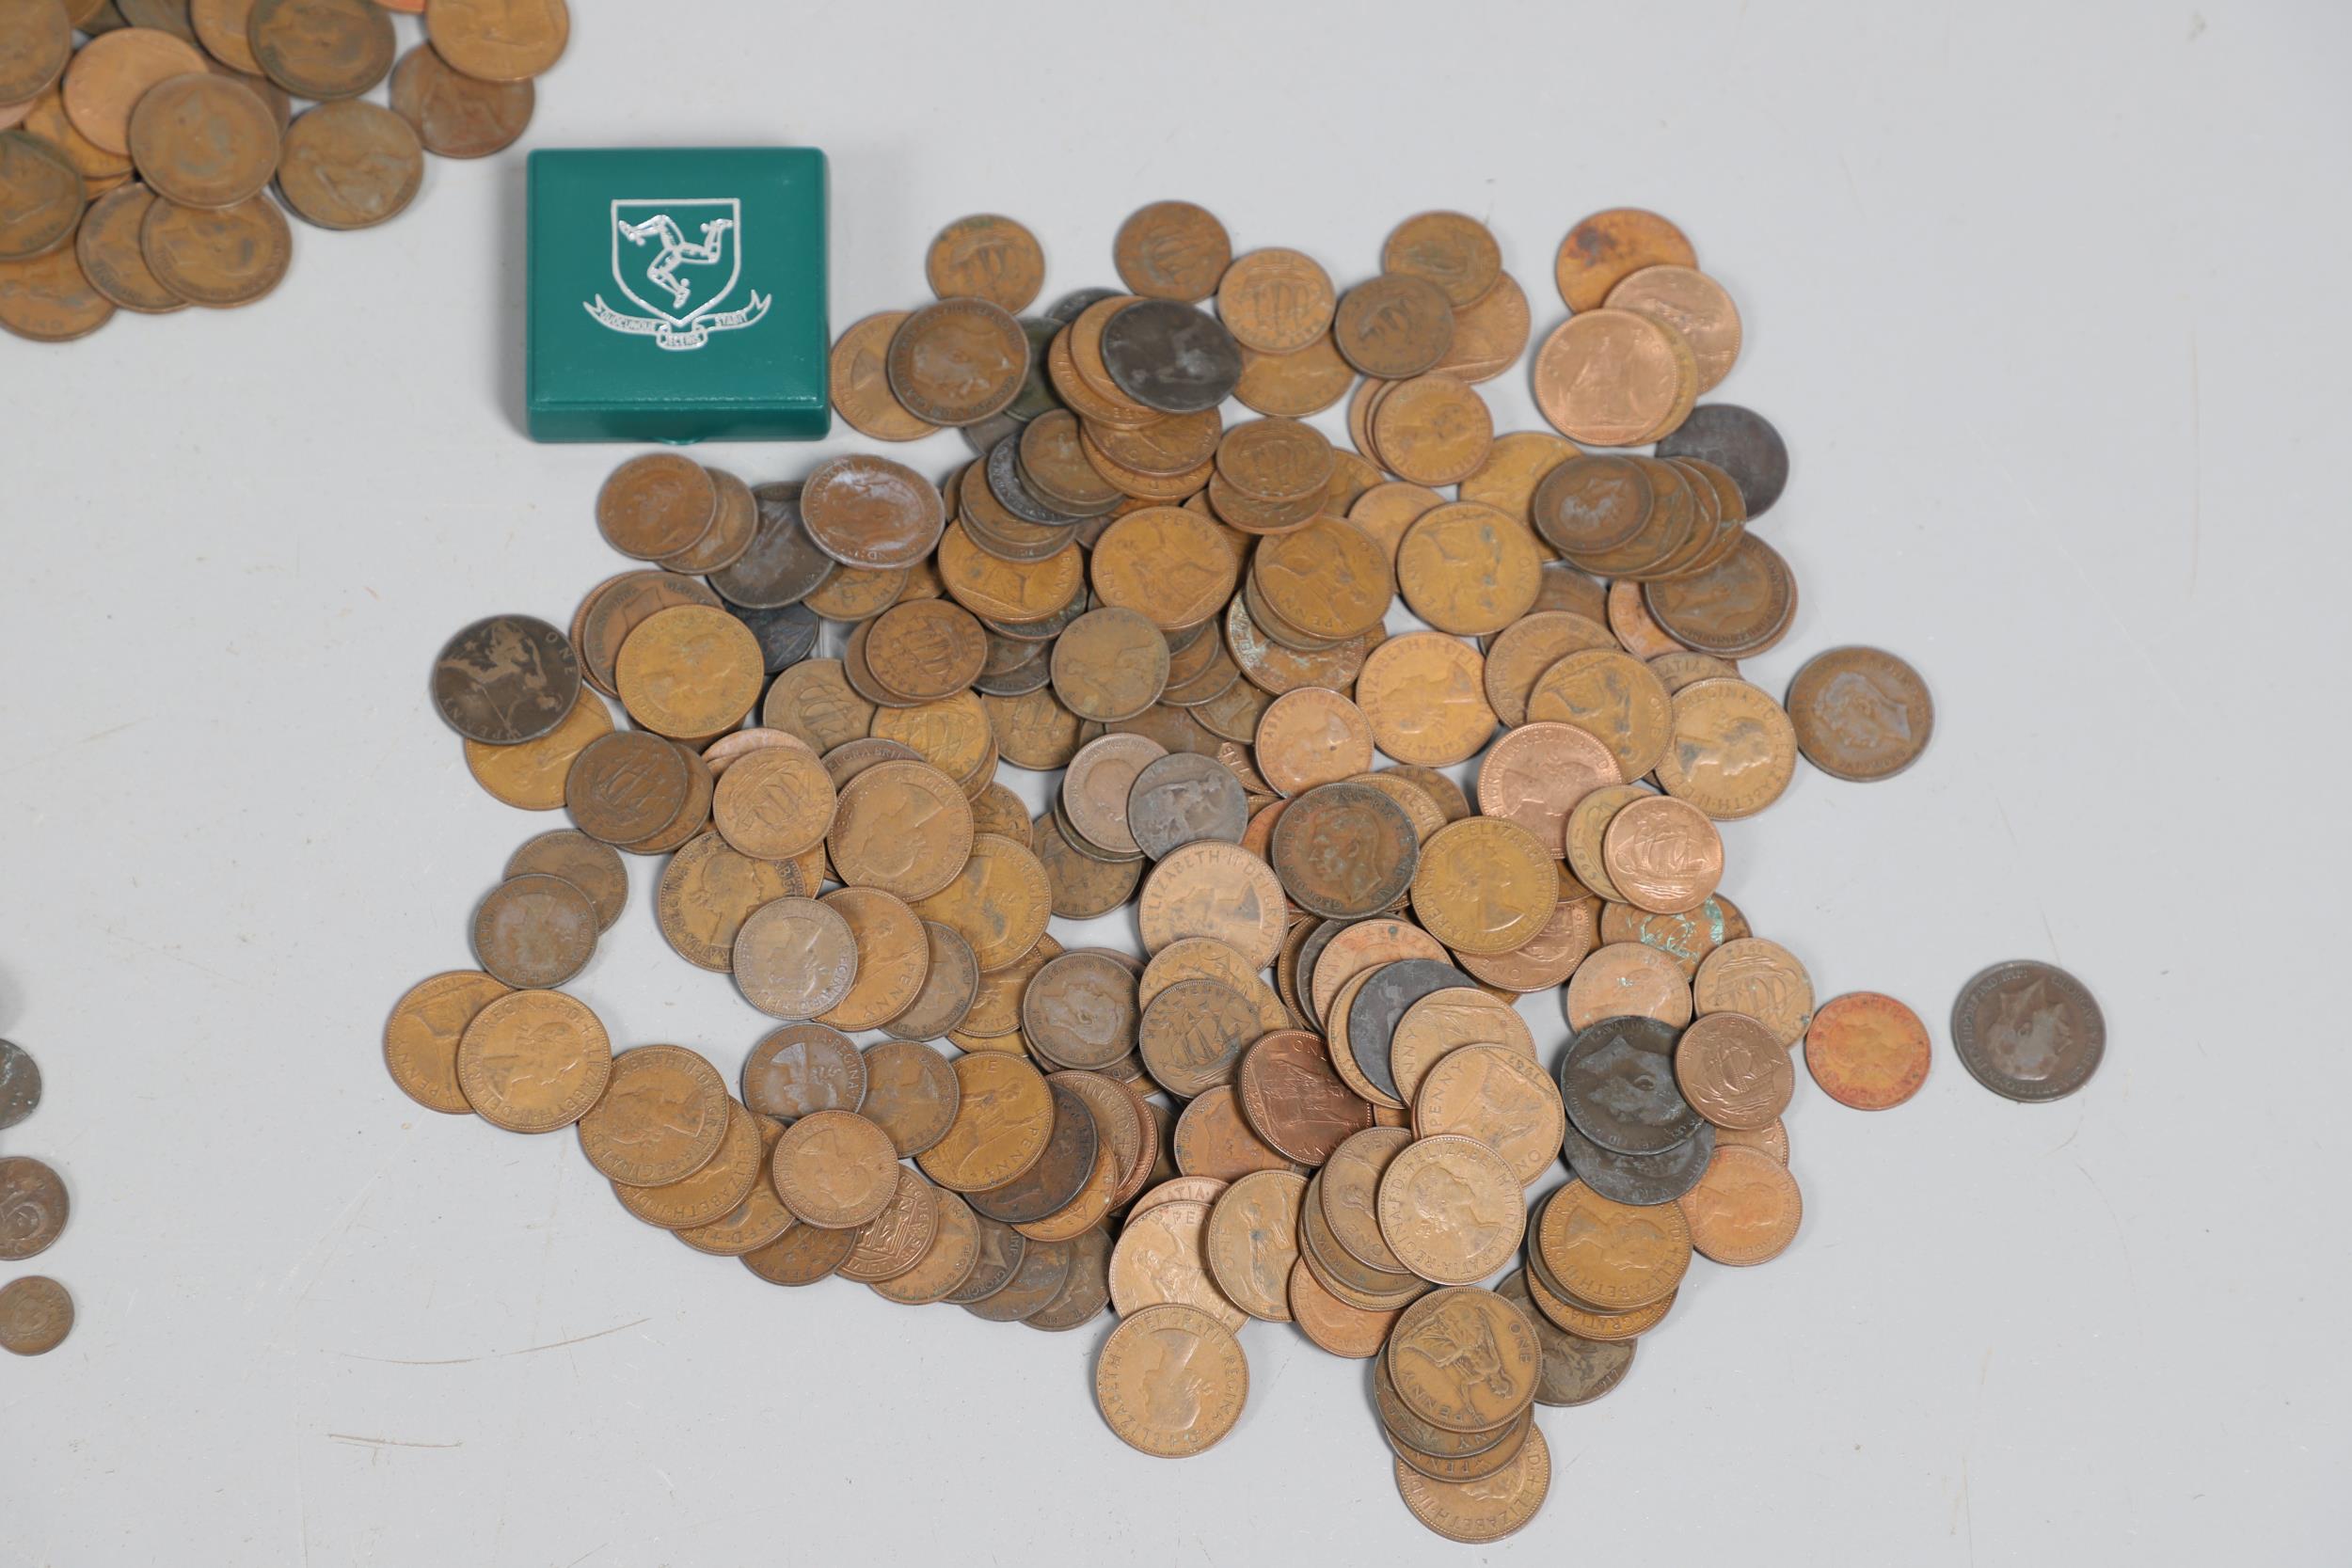 A LARGE COLLECTION OF WORLD COINS AND SIMILAR BRITISH COINS. - Image 2 of 20